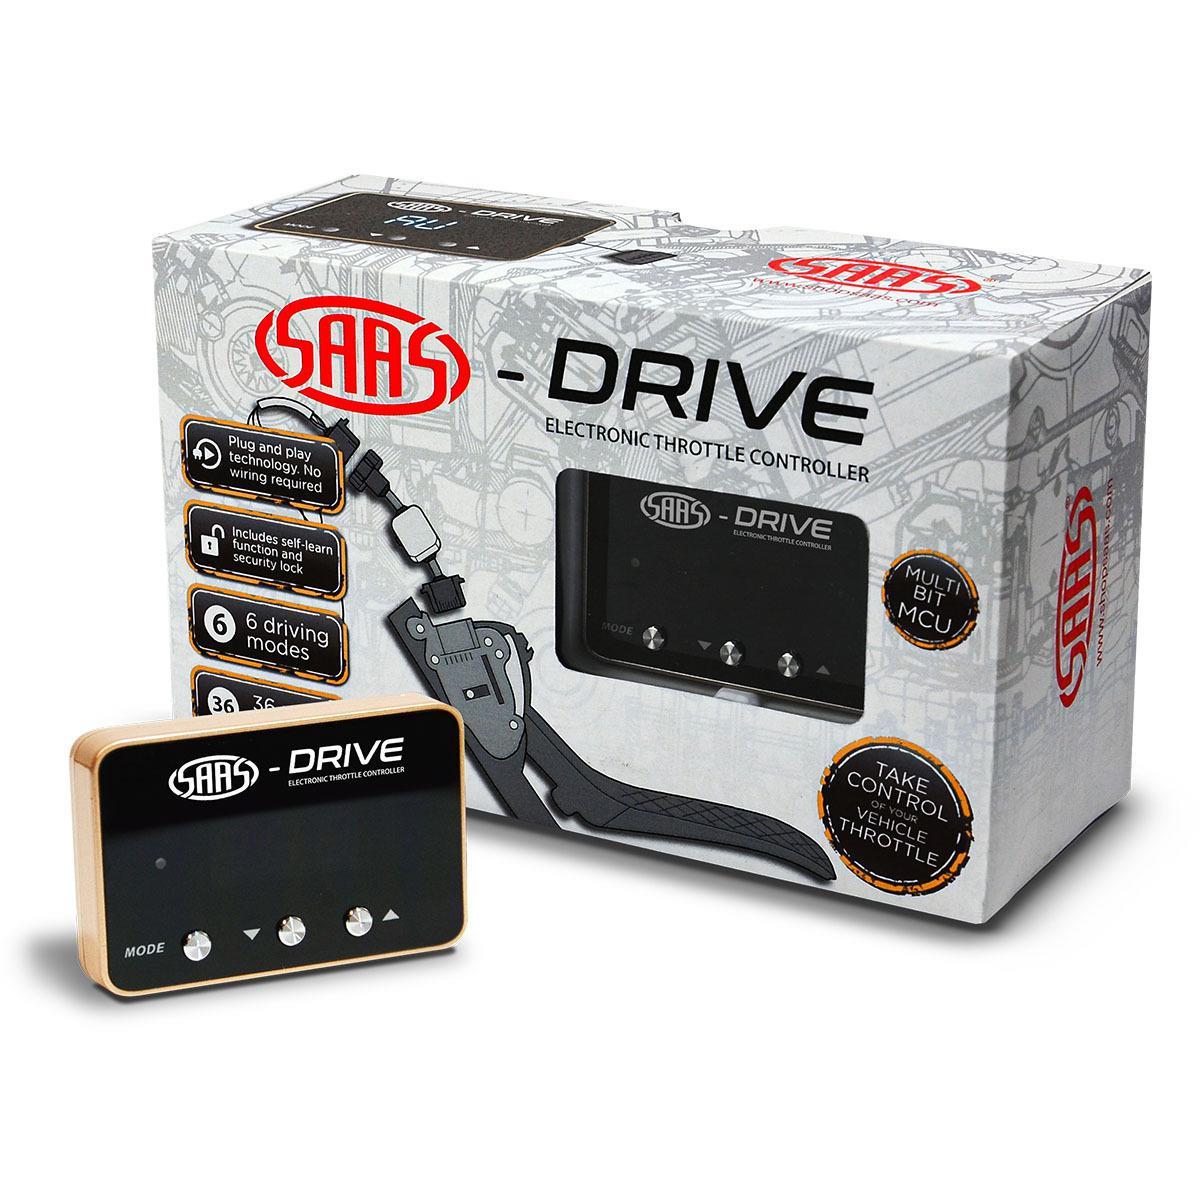 SAAS-Drive Throttle Controller For Haval H6